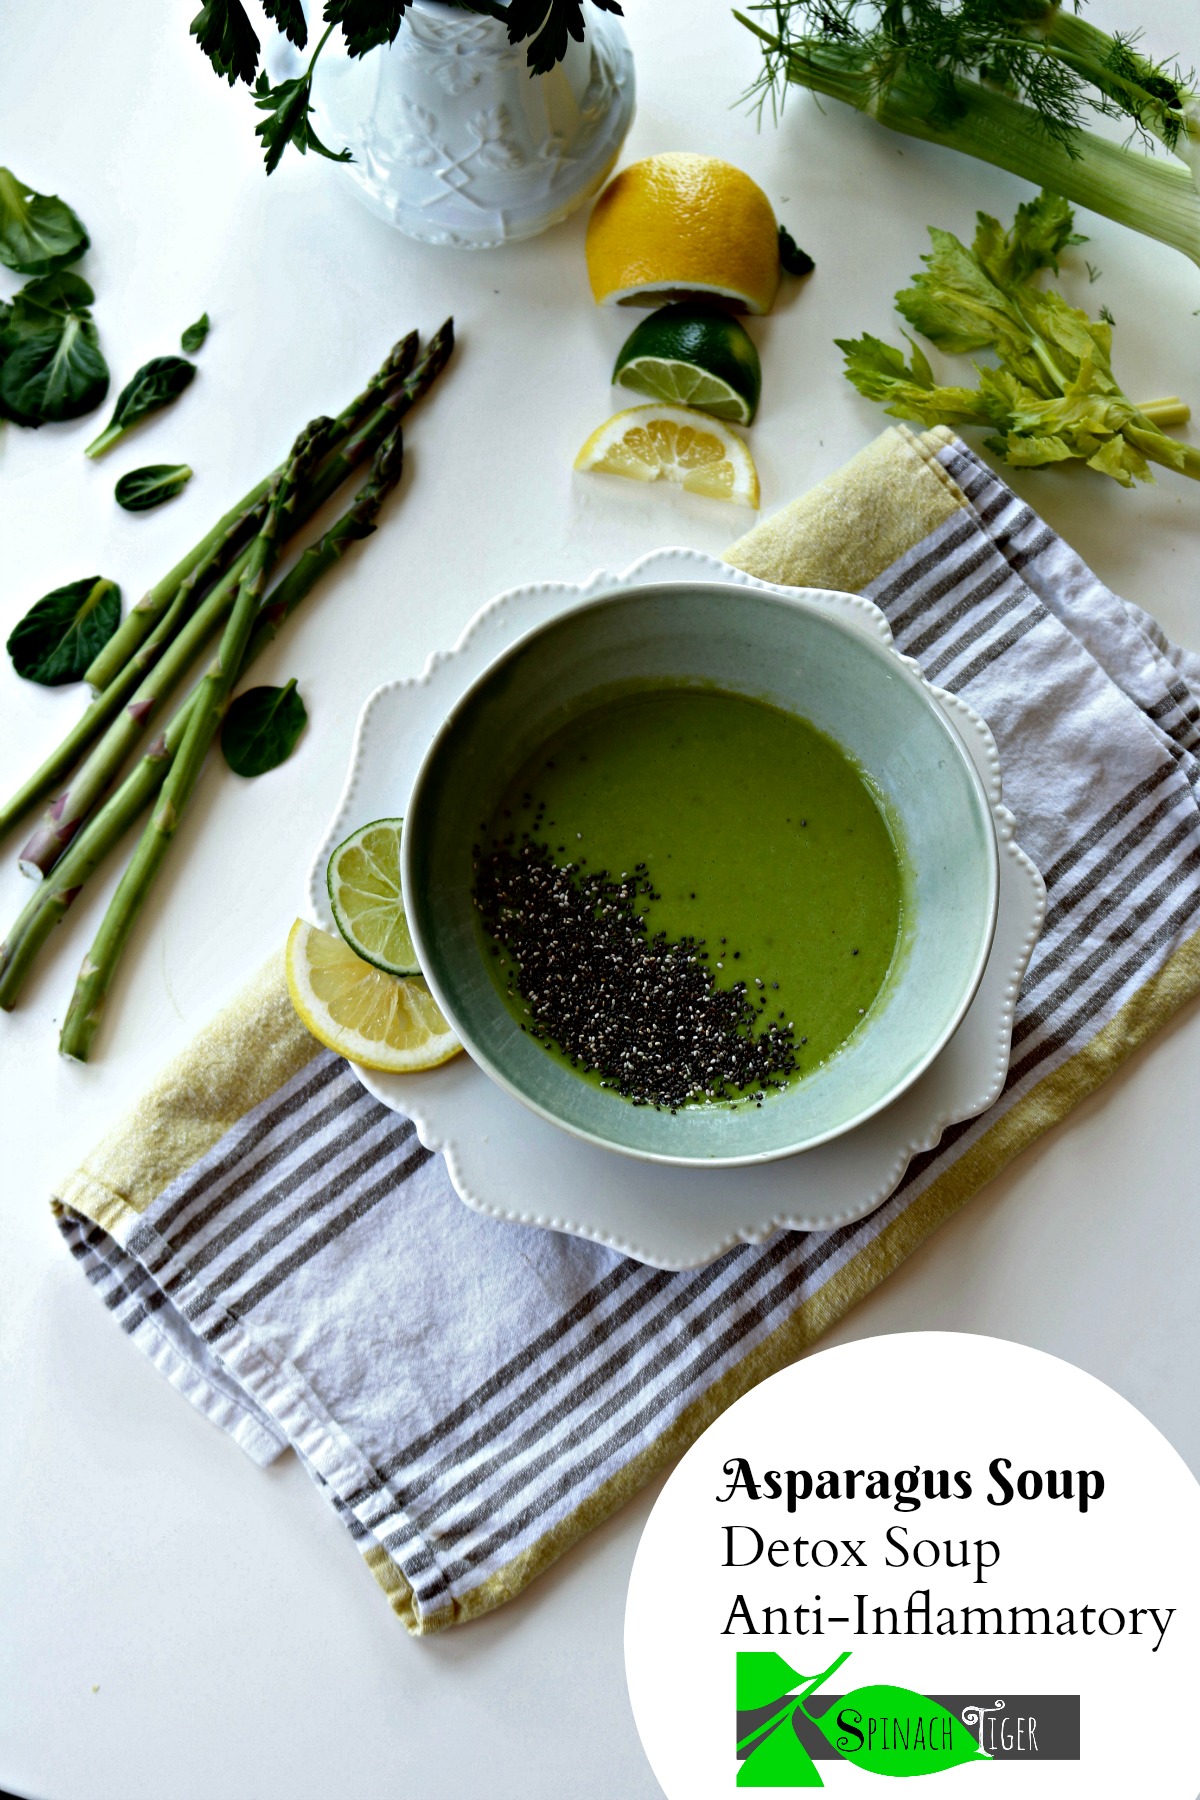 how to make best healthy asparagus soup recipe great as a detox soup from spinach tiger